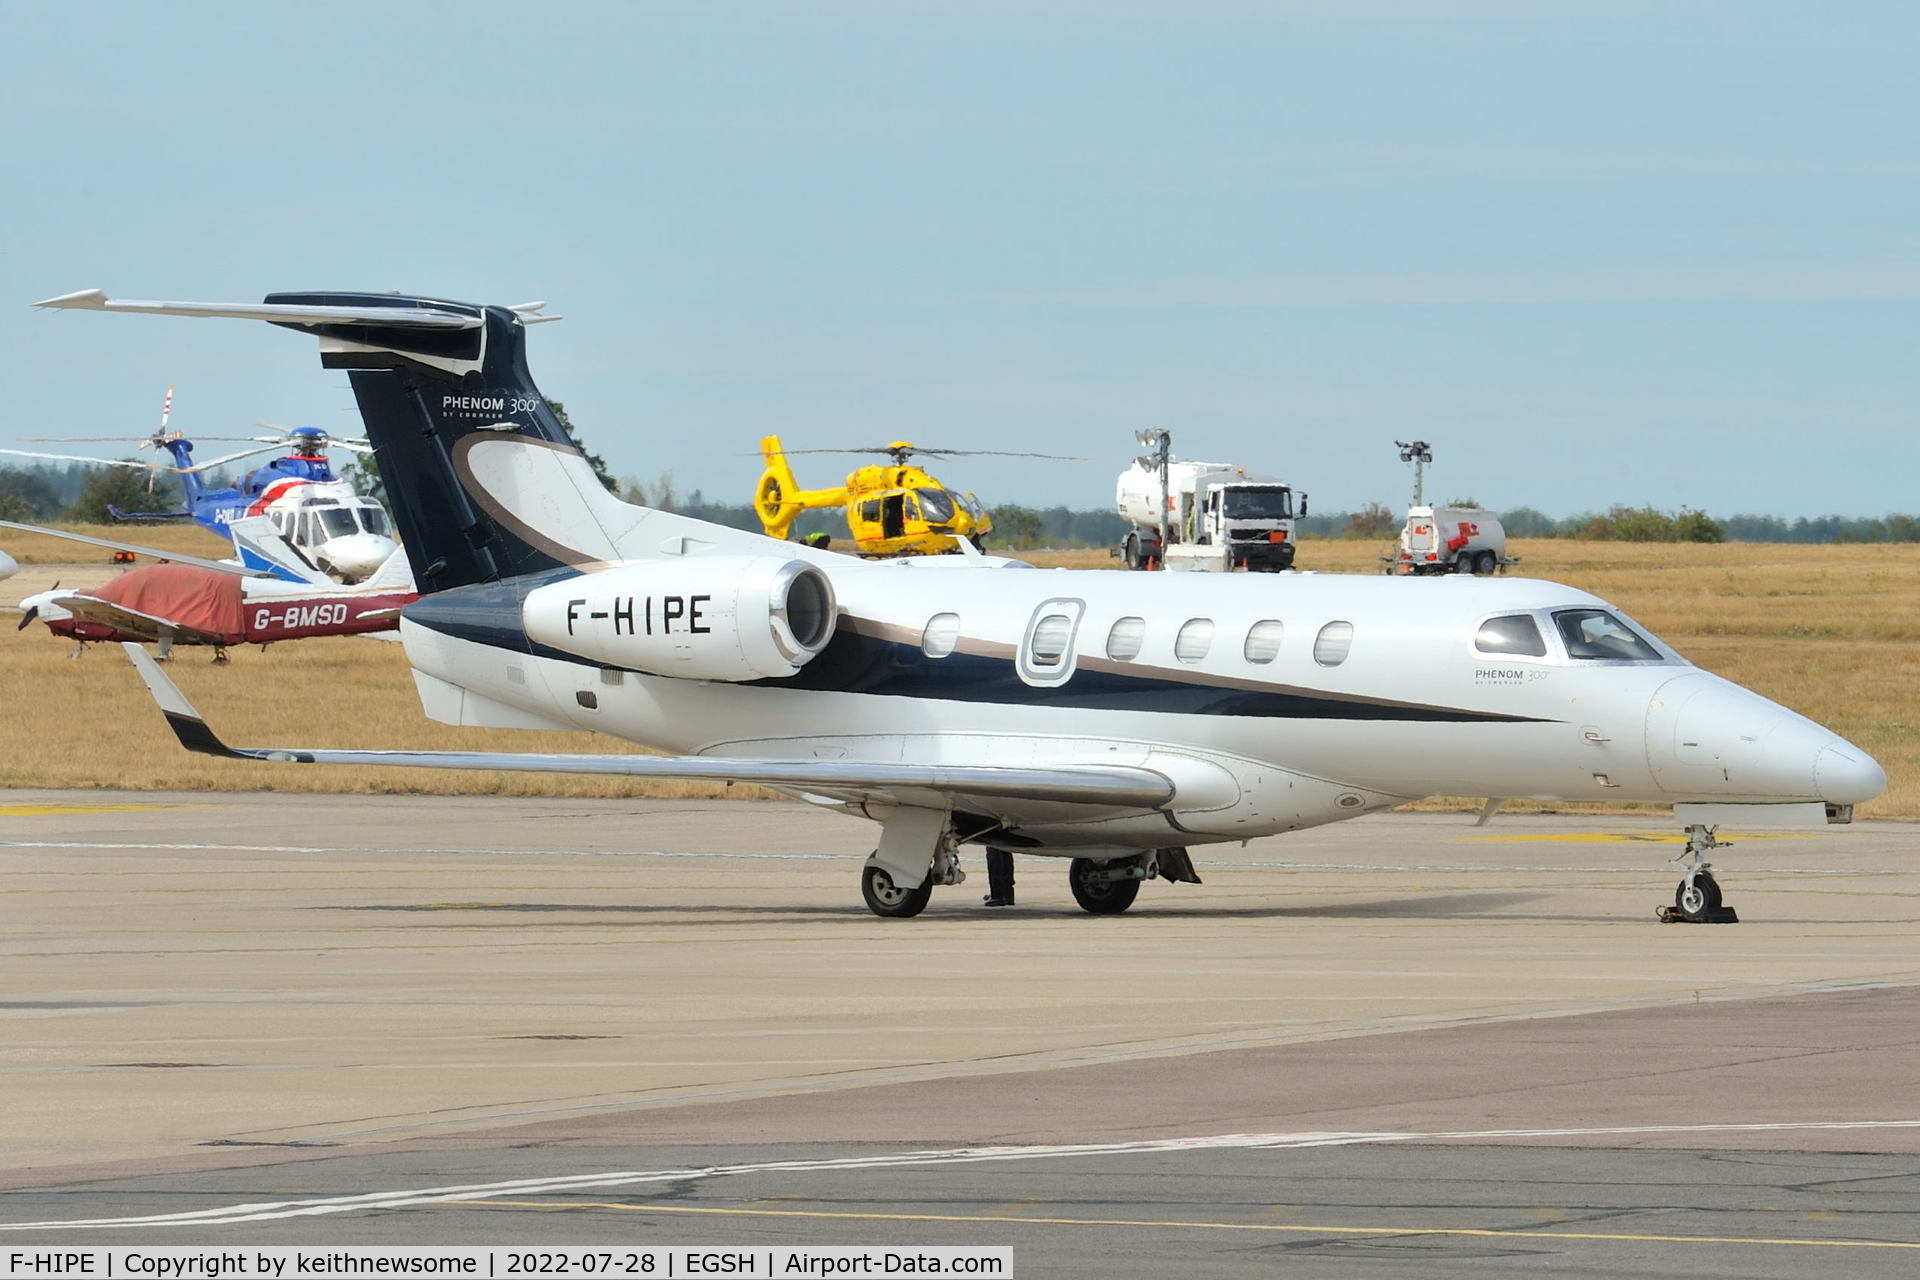 F-HIPE, 2010 Embraer EMB-505 Phenom 300 C/N 50500016, Arrived at Norwich from Lyon, France.